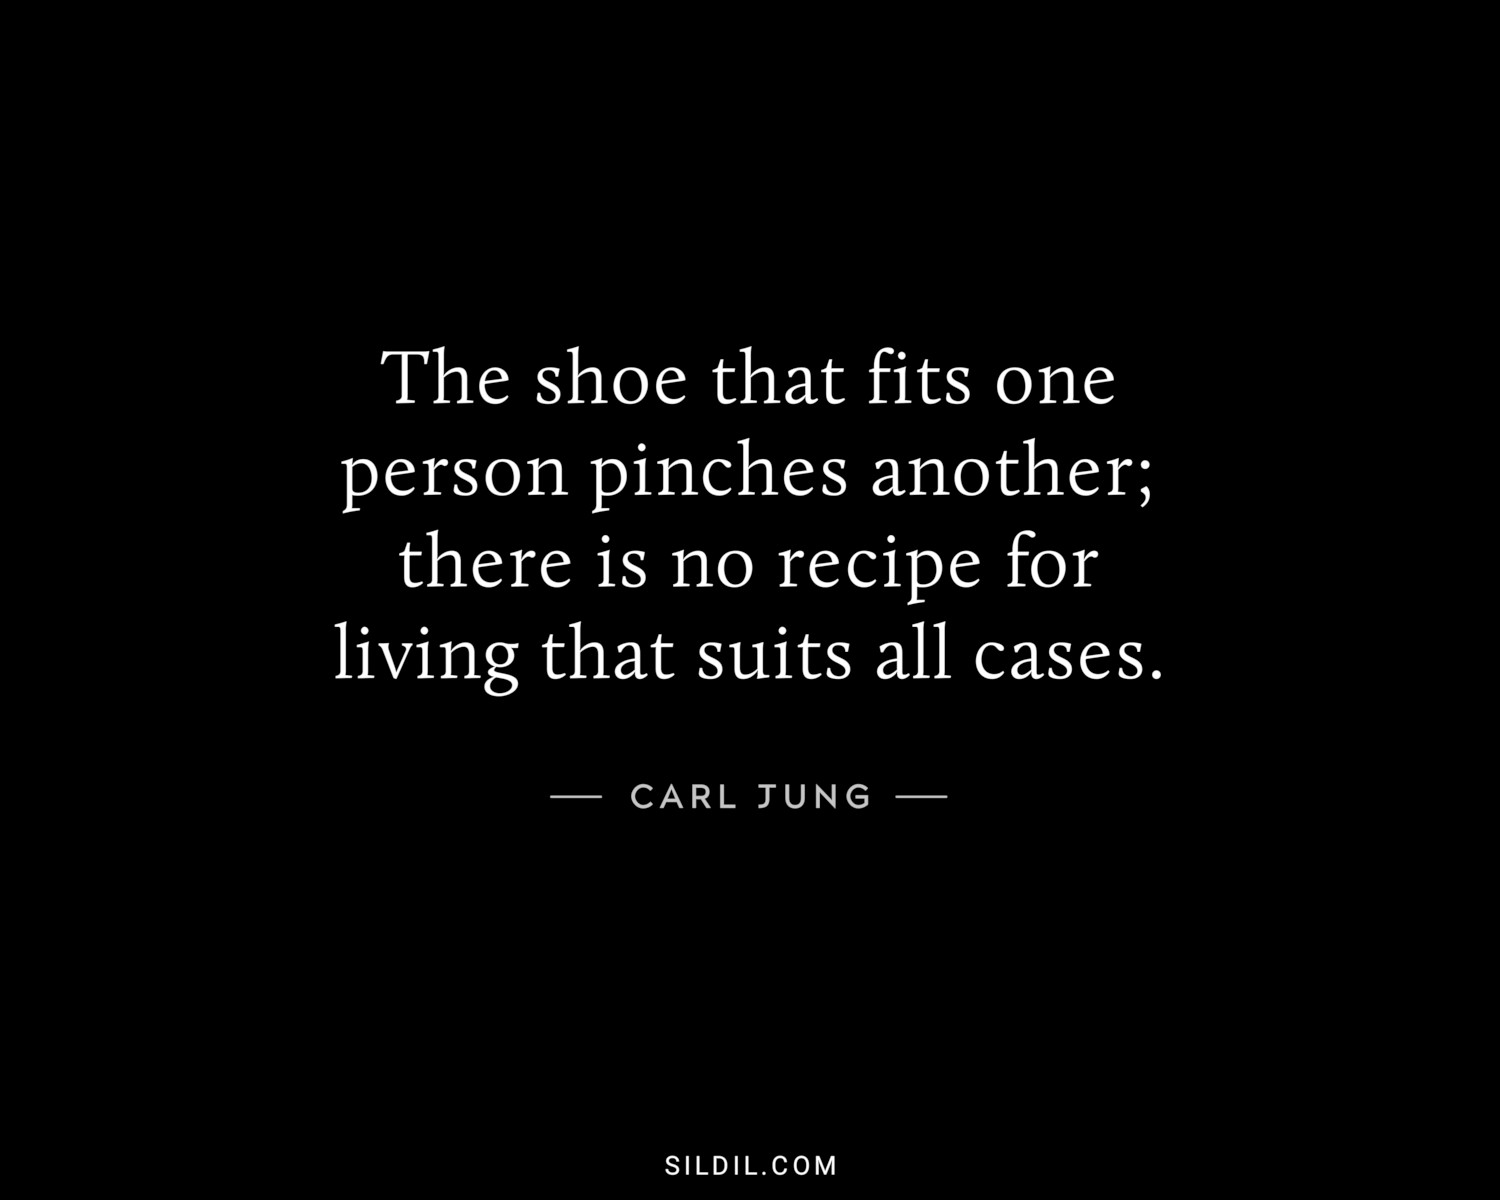 The shoe that fits one person pinches another; there is no recipe for living that suits all cases.